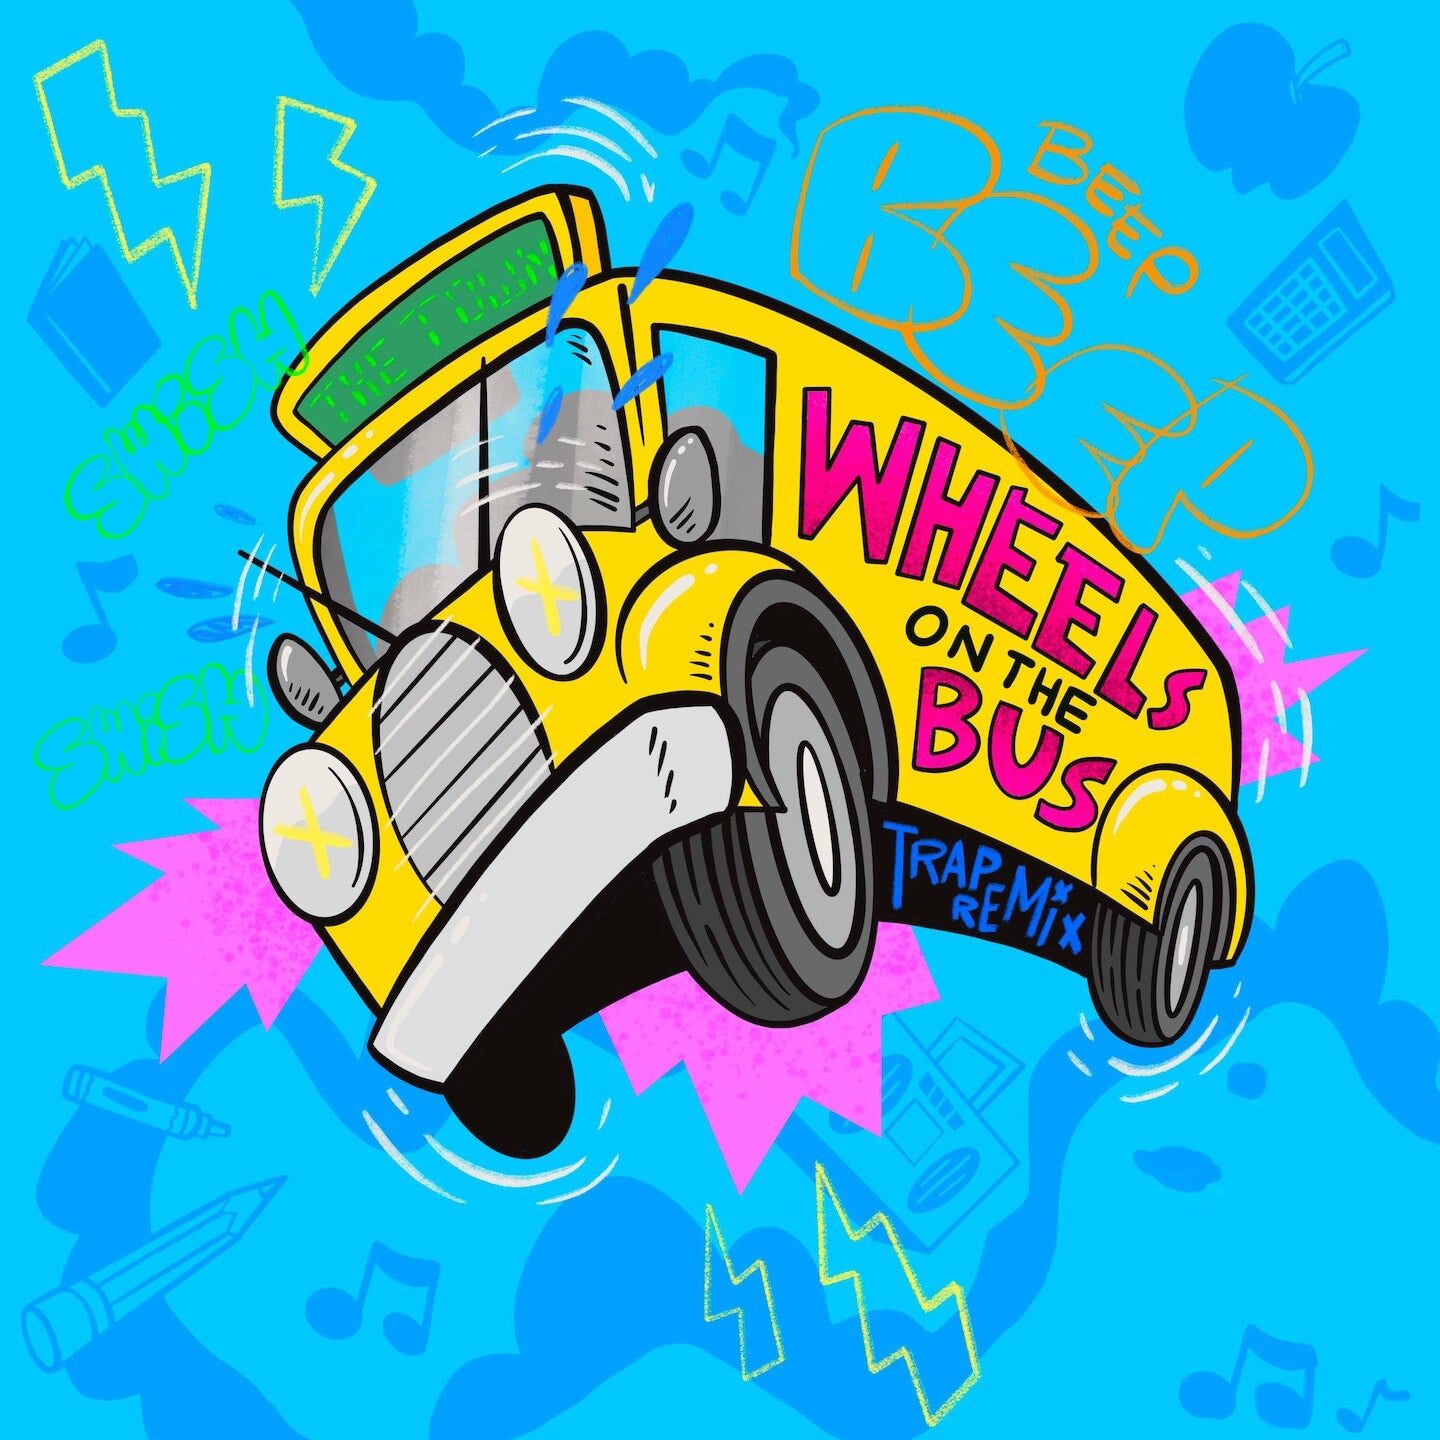 Wheels On The Bus (trap remx) master 2